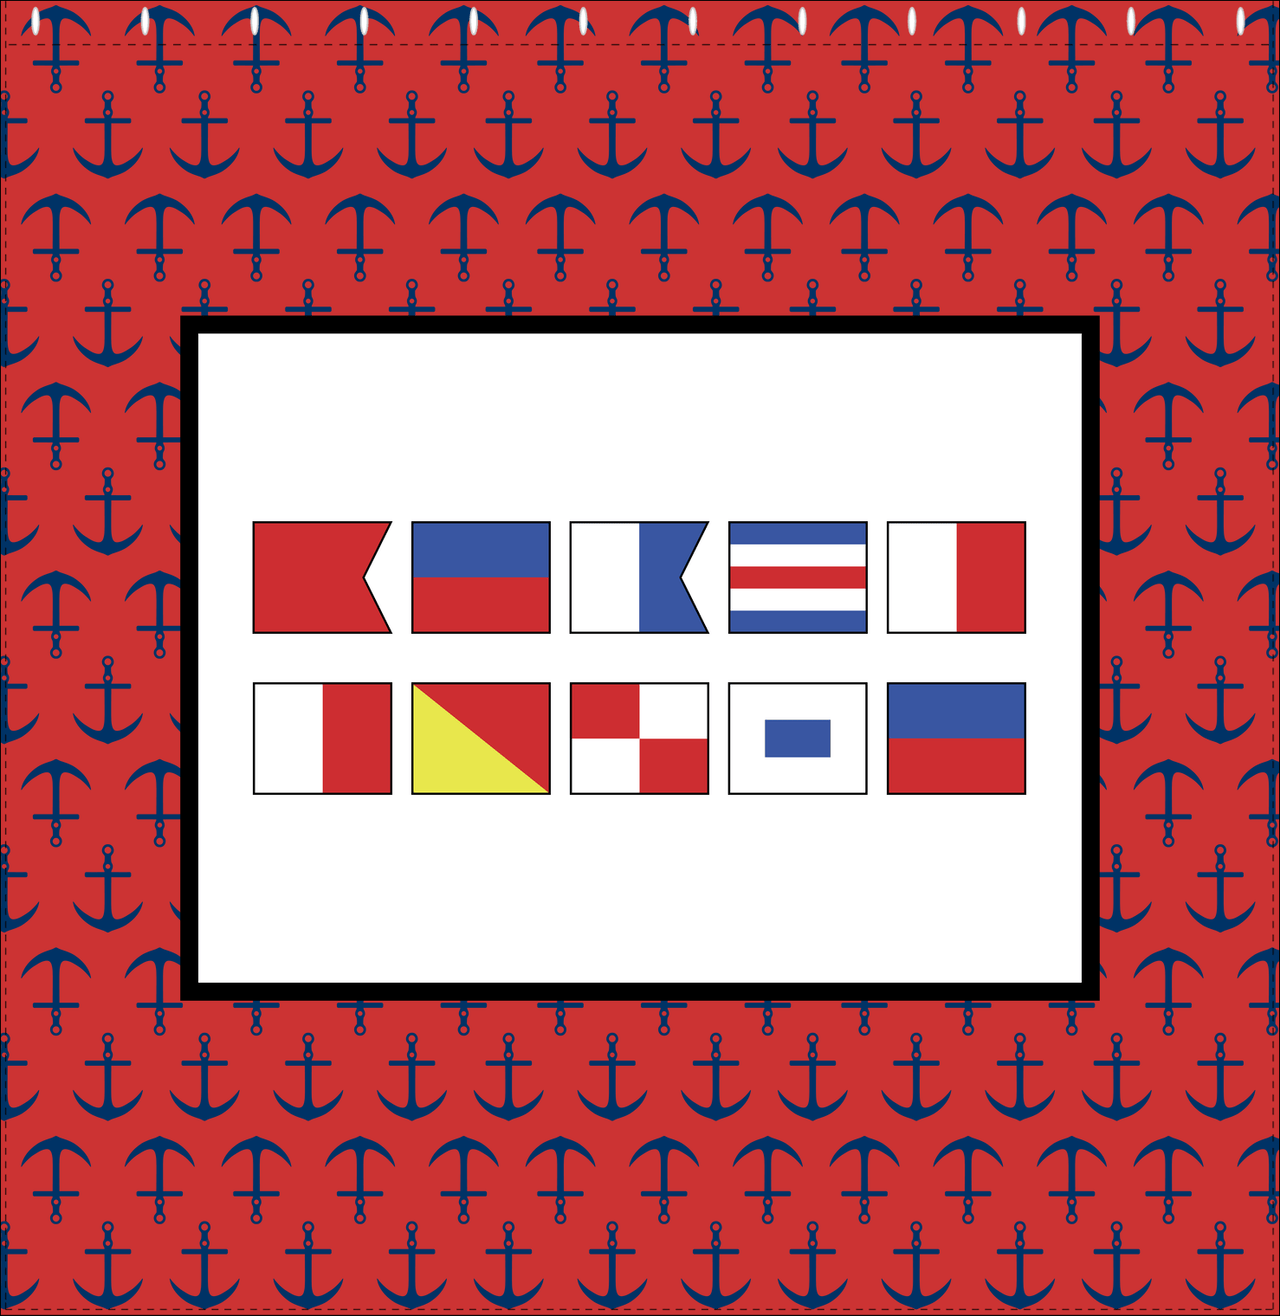 Personalized Nautical Flags Shower Curtain with Anchors - Red and Black - Flags without Letters - Decorate View